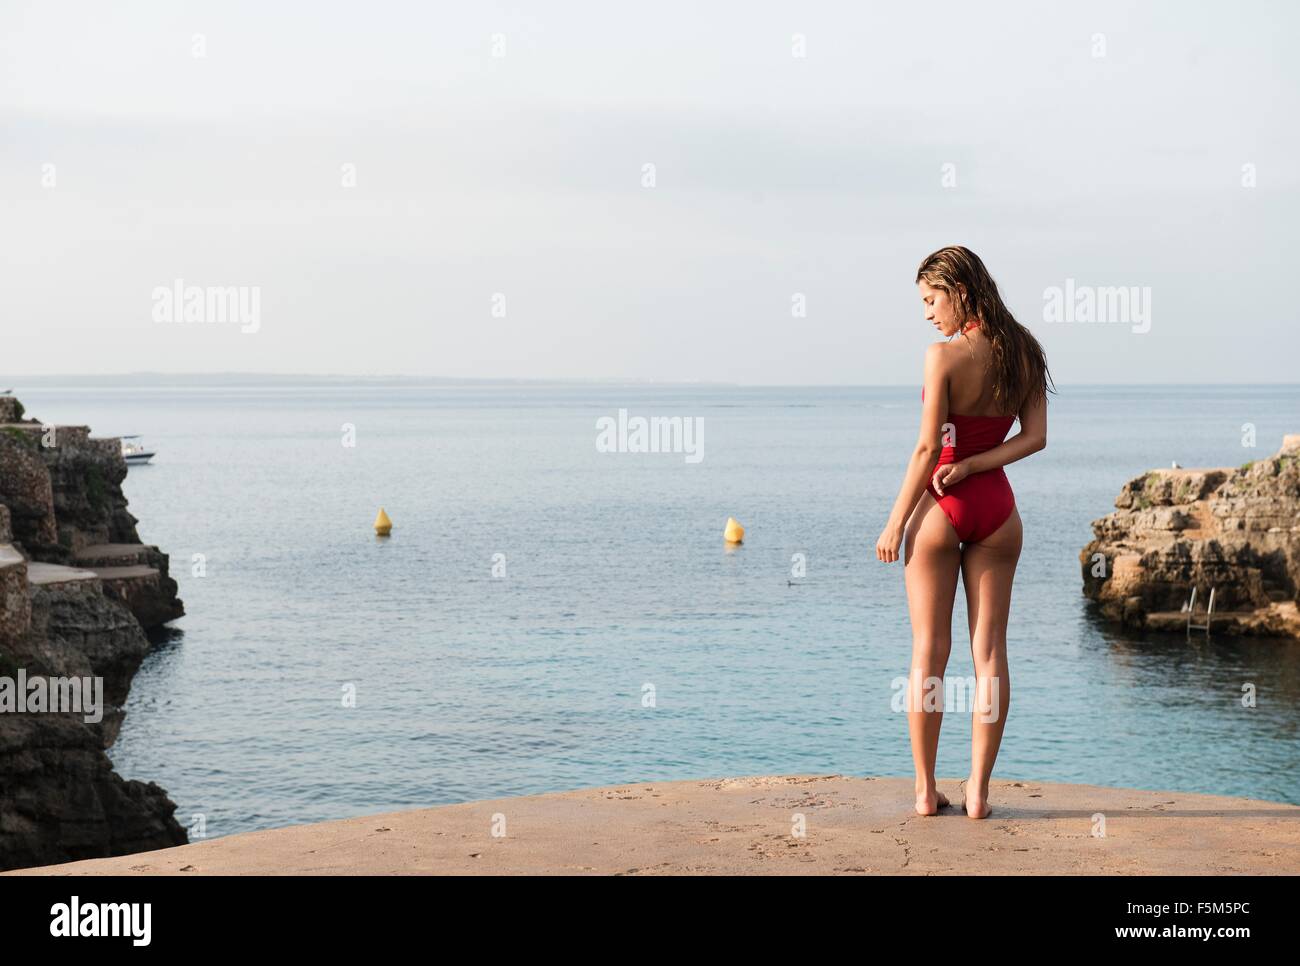 Rear view of young woman in swimming costume looking down from Cala en Brut, Menorca, Balearic islands, Spain Stock Photo